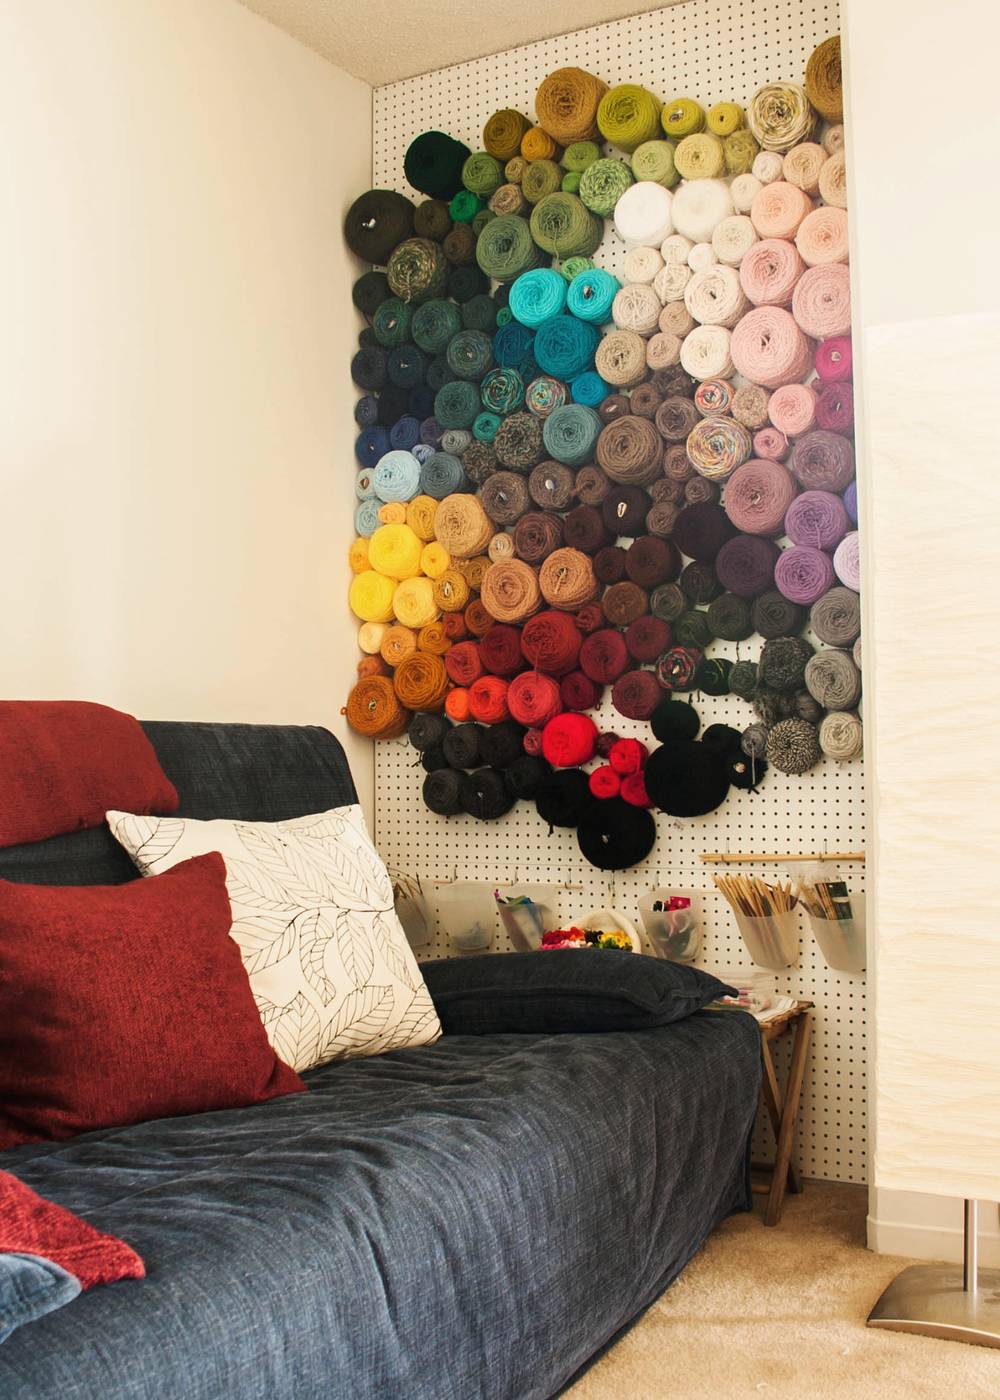 Dorm Decor: 15 Items To Help You Stay Organized In The Coolest Way 